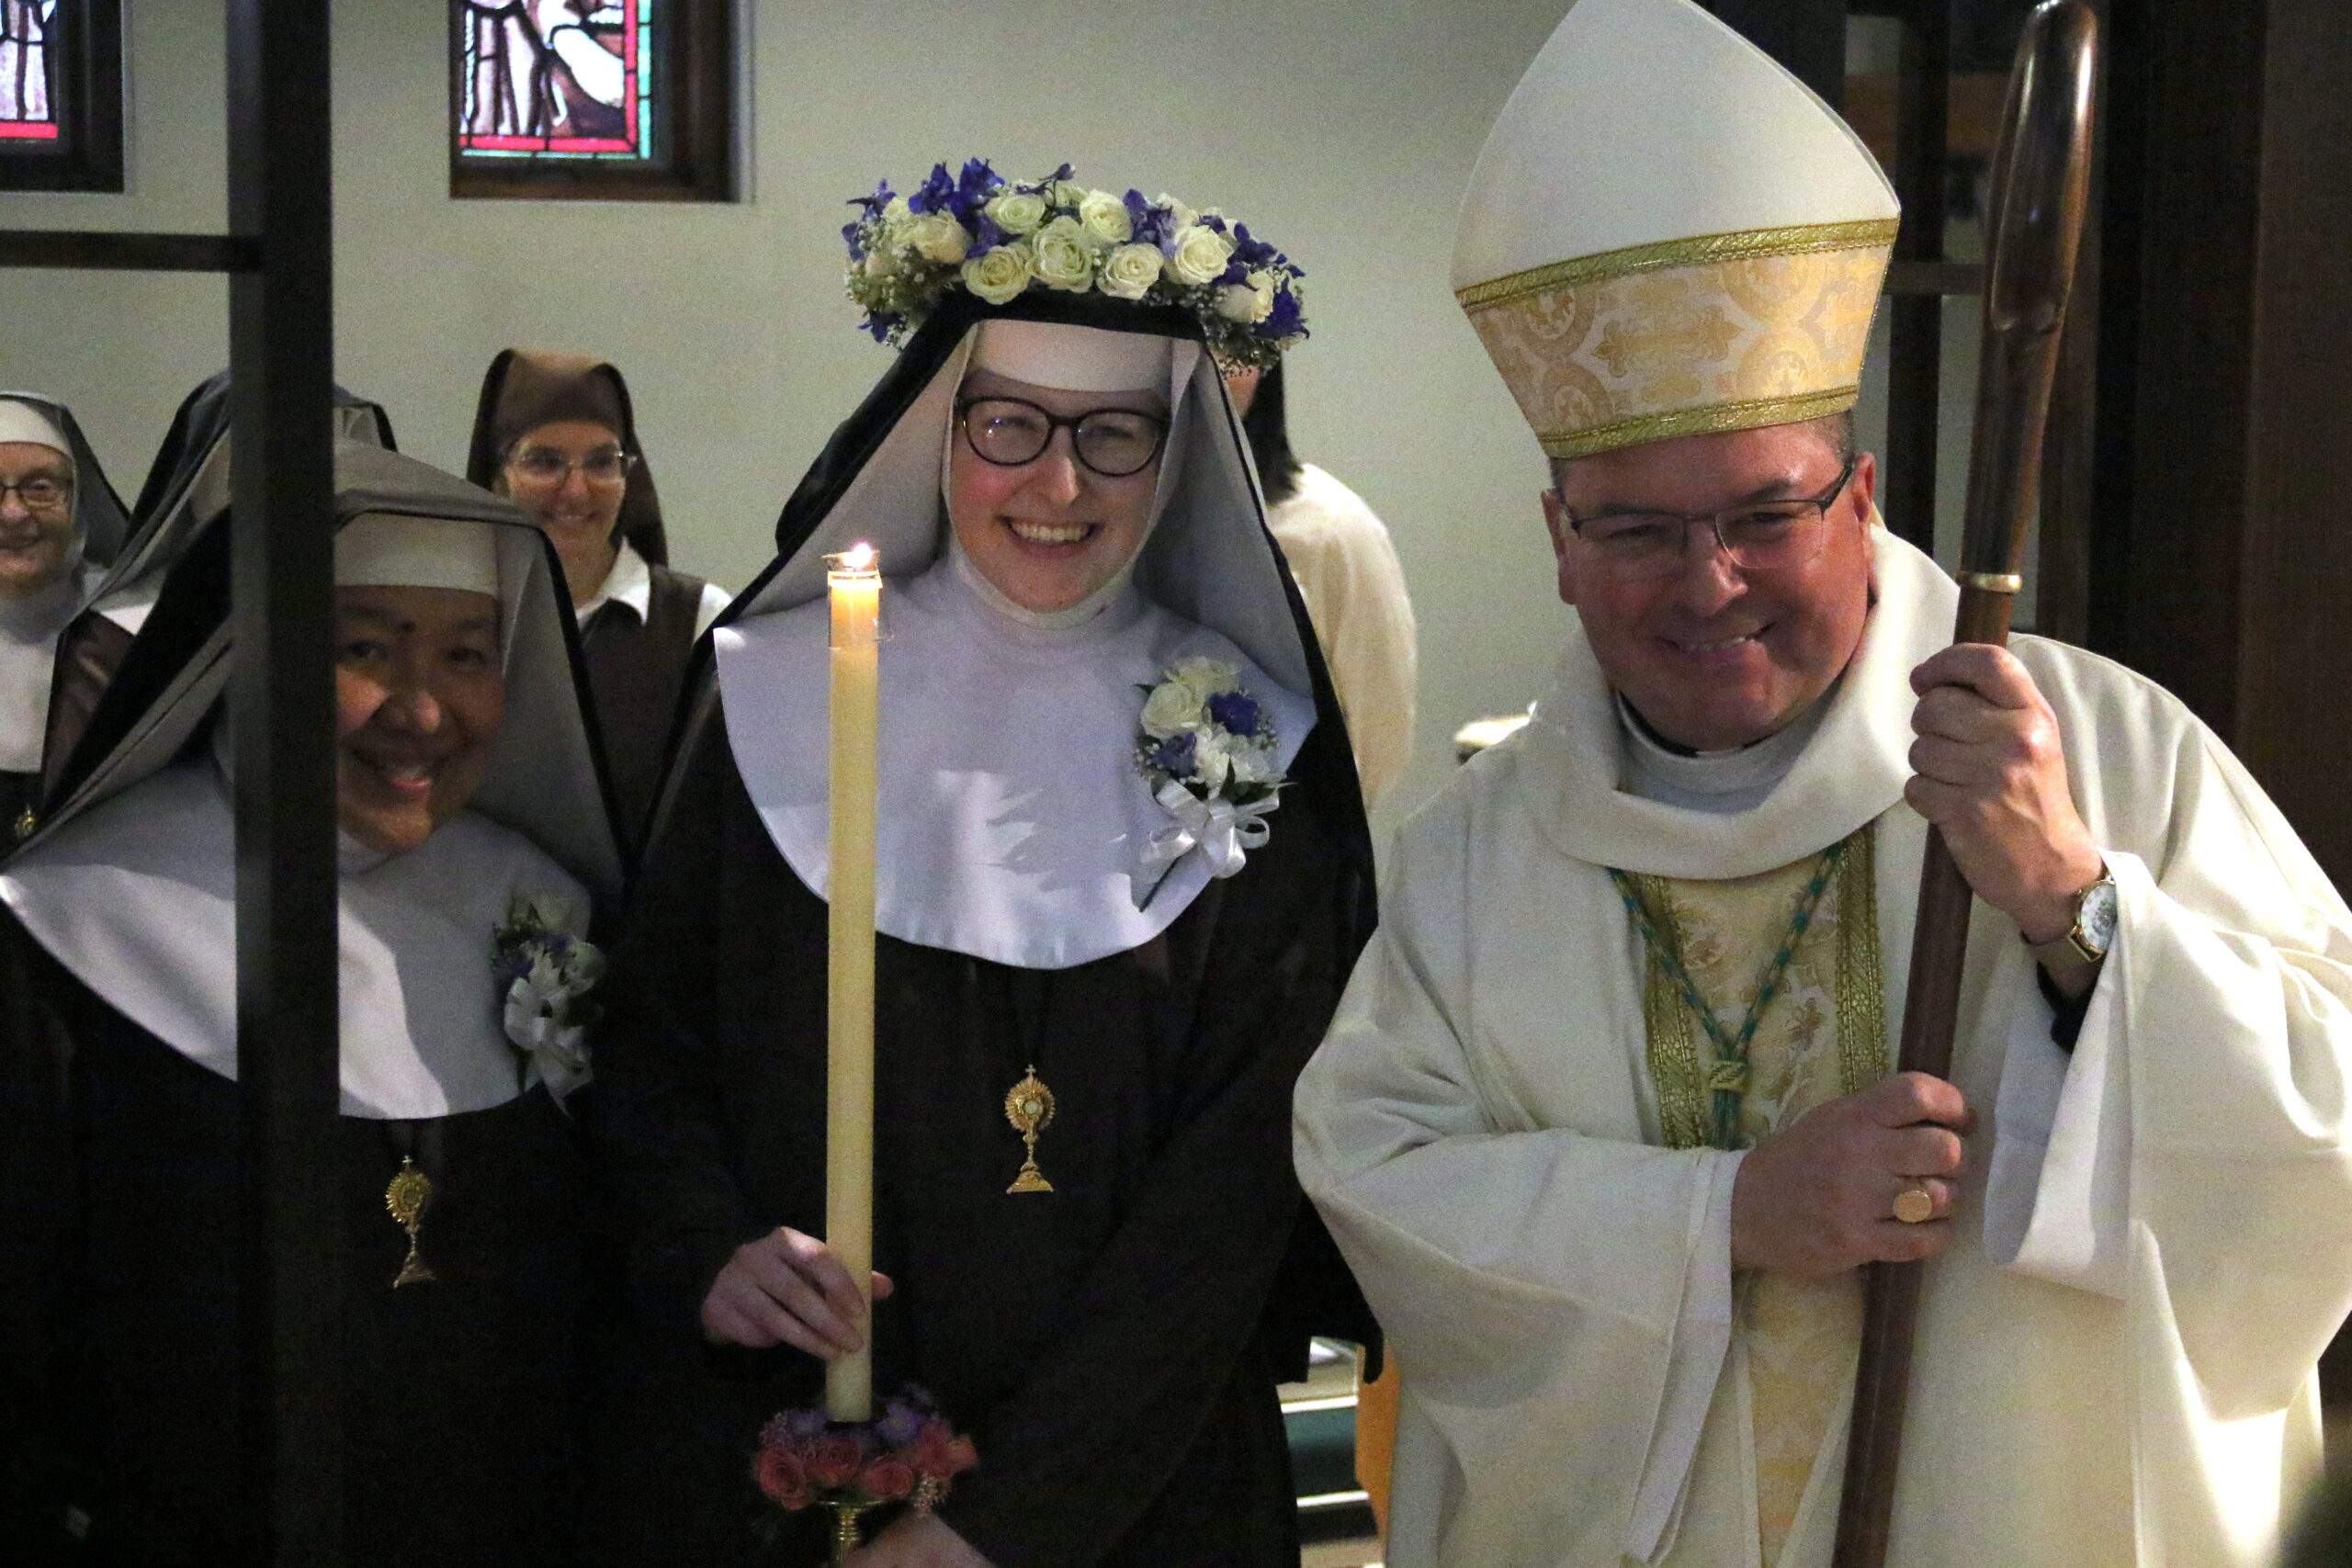 Bishop Bonnar poses for a picture with Sr. Therese Marie, who is wearing a flower crown and holding a candle.